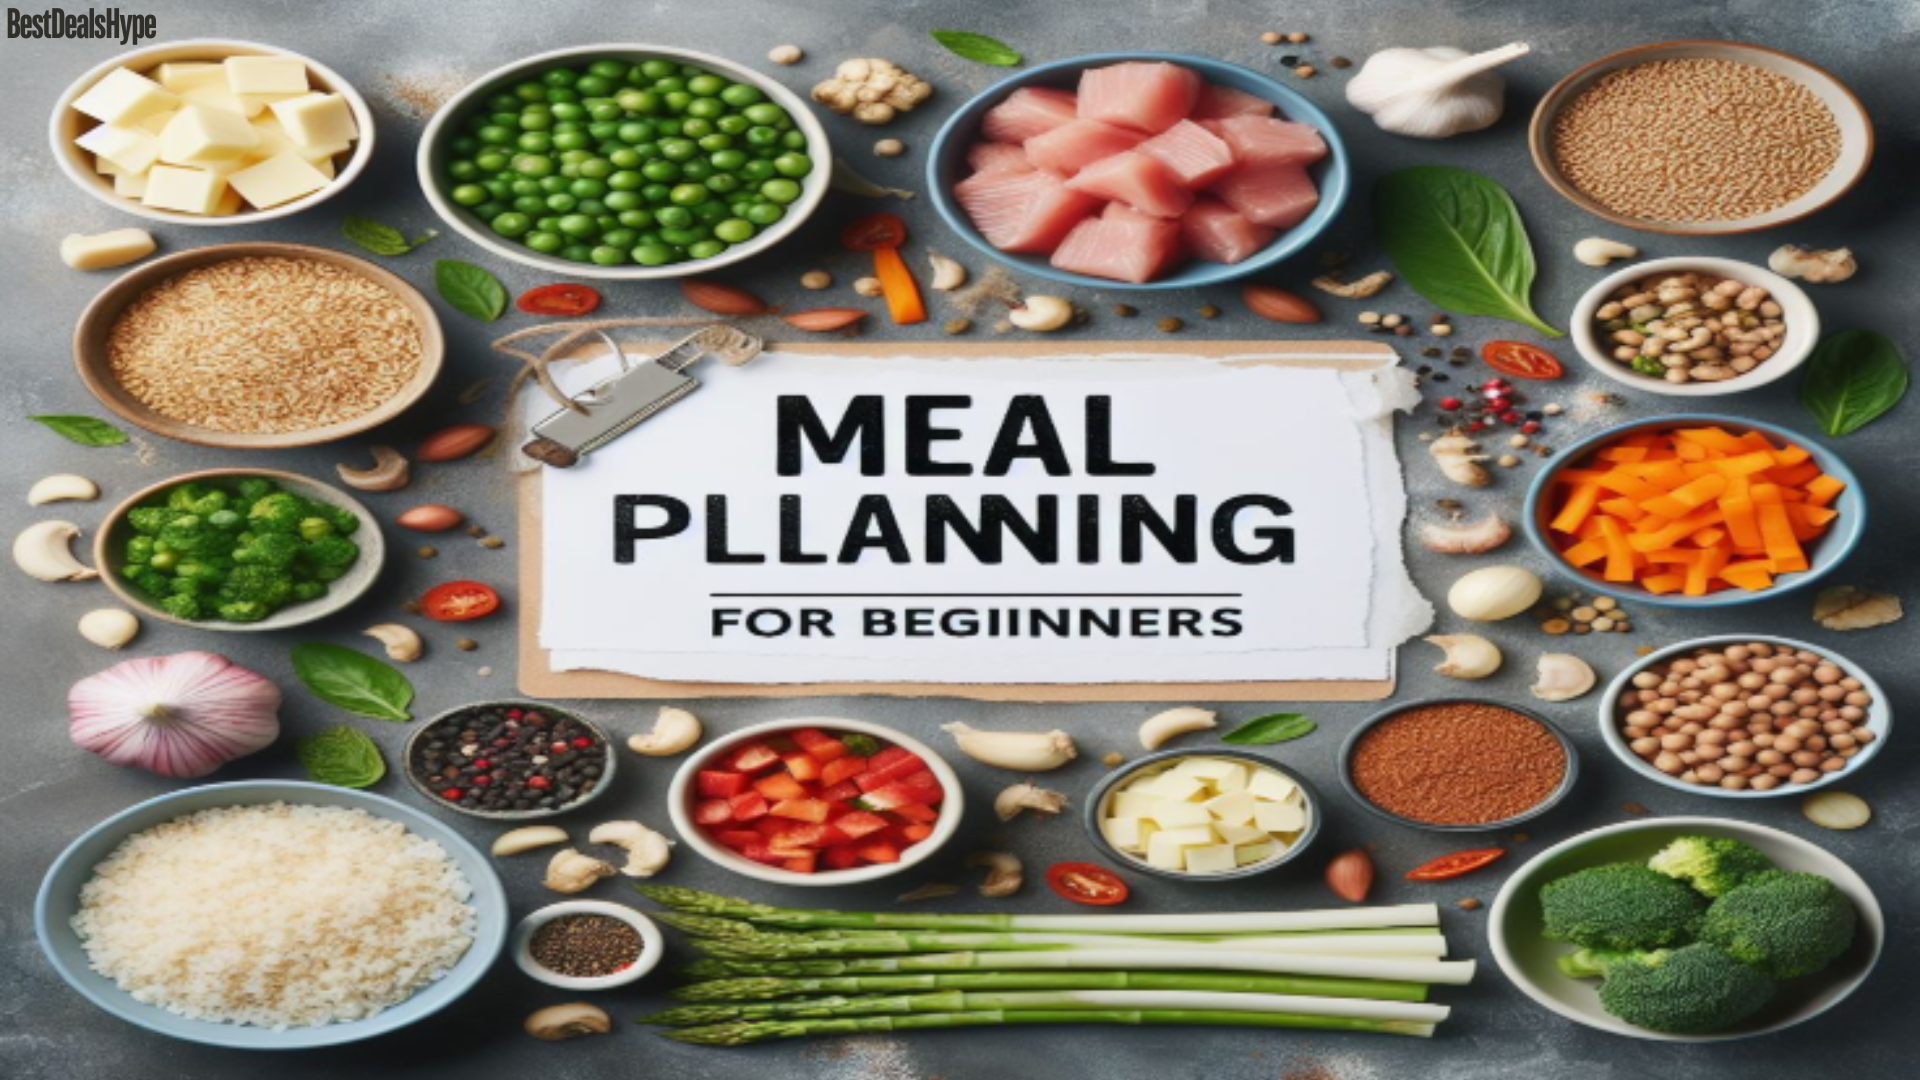 Learn the importance of meal planning for healthier eating, time savings, cost efficiency, and reduced stress, along with easy steps and tips for beginners.